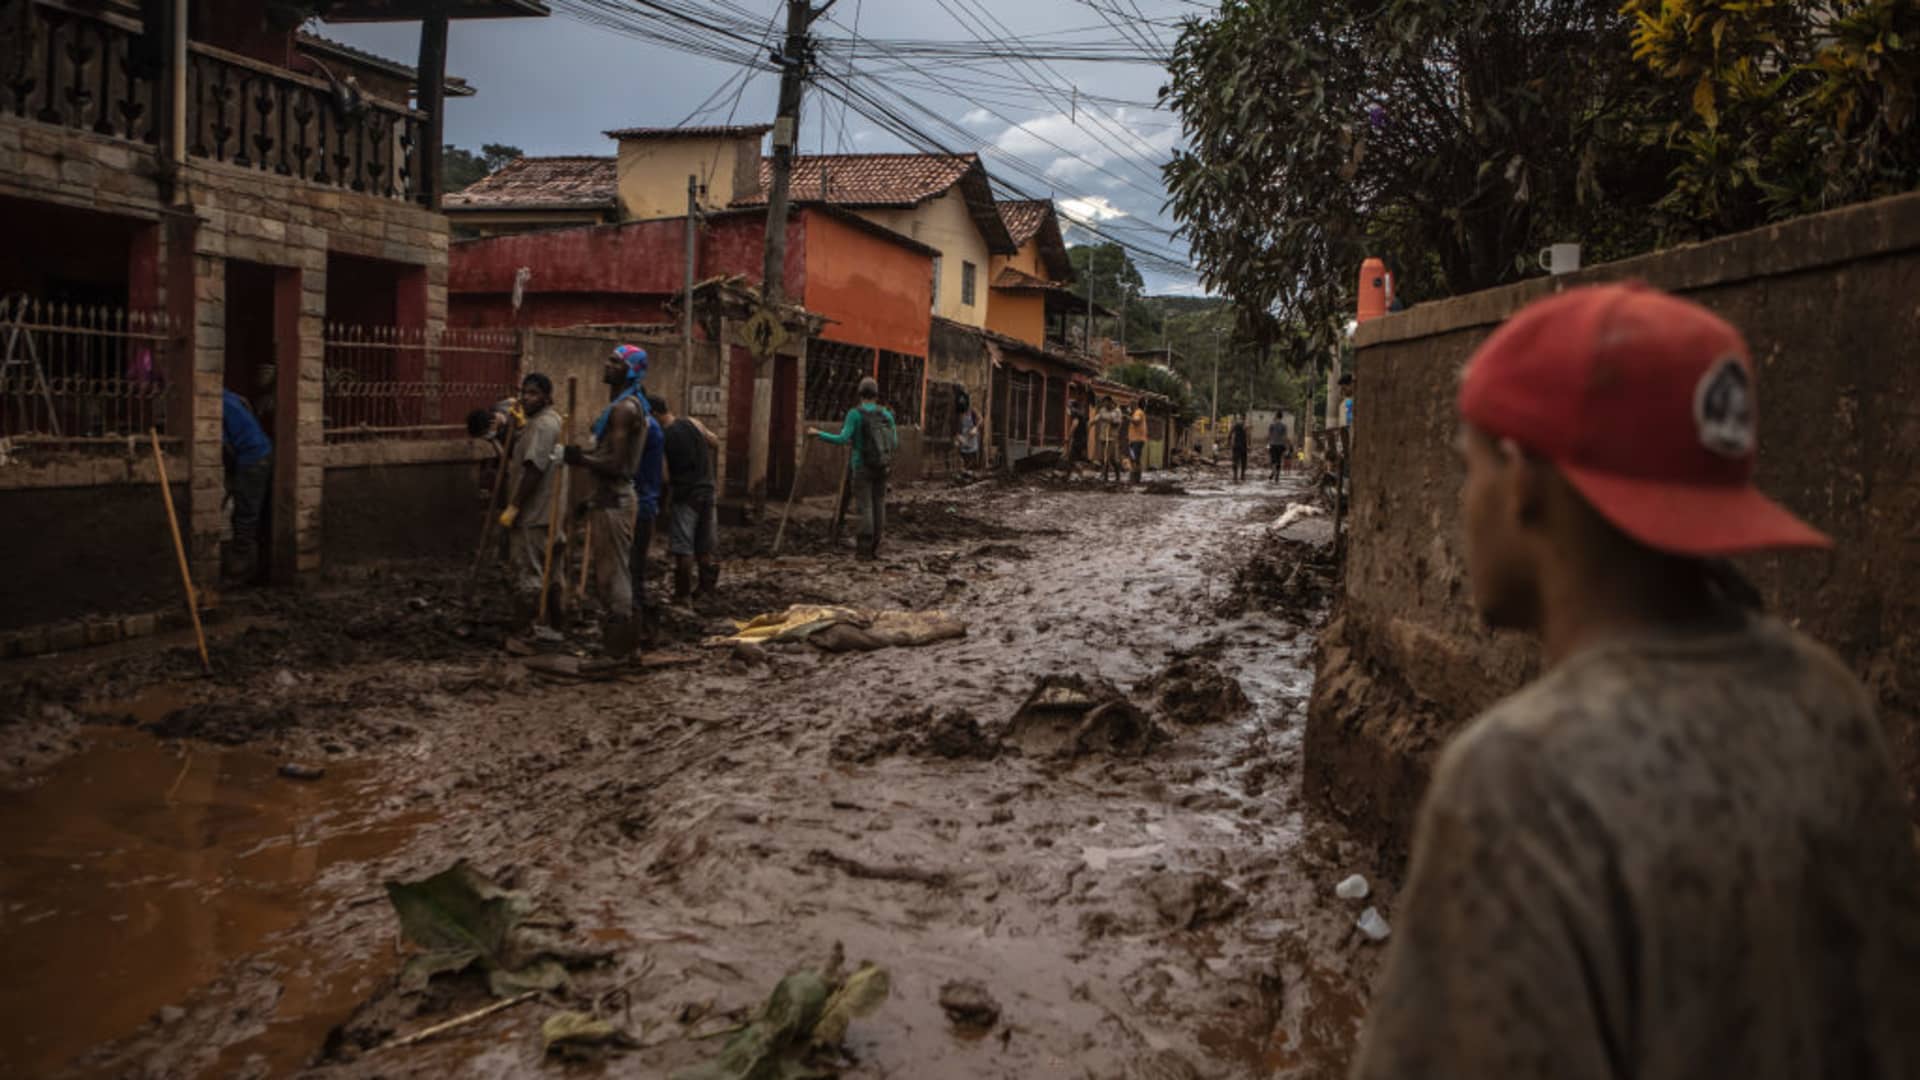 Heavier-than-normal downpours in Brazil, even for a wet season, brought flooding that destroyed communities and led to halted iron mining operations across the state of Minas Gerais on Saturday, Jan. 15, 2022.